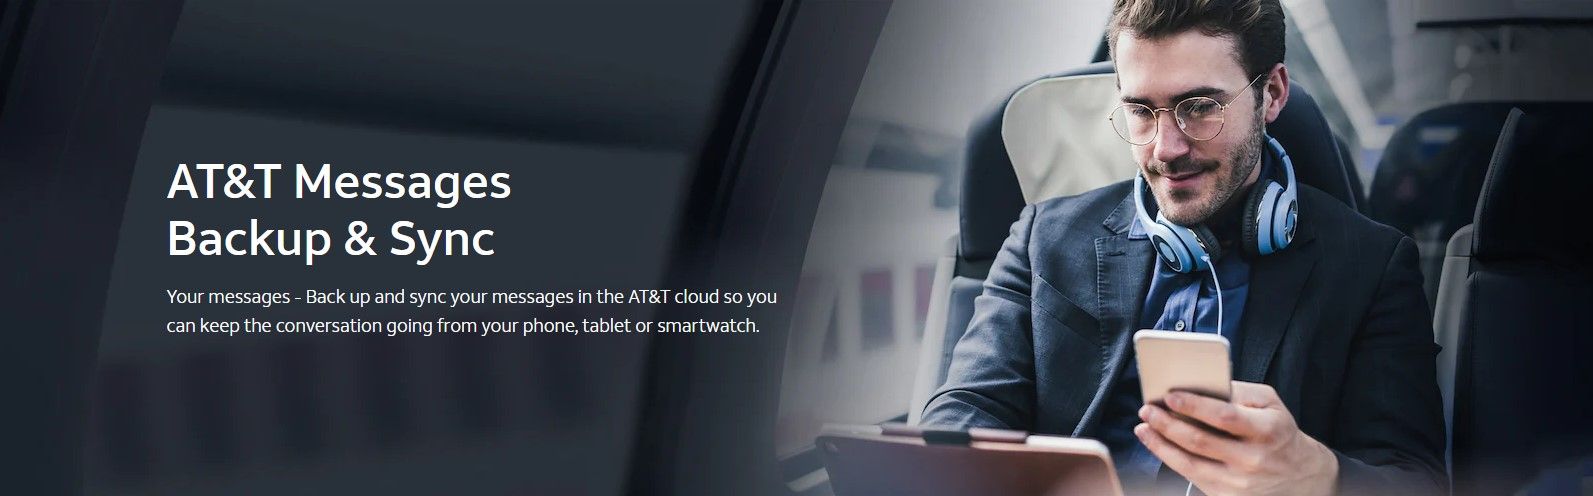 Banner image from AT&T Messages website